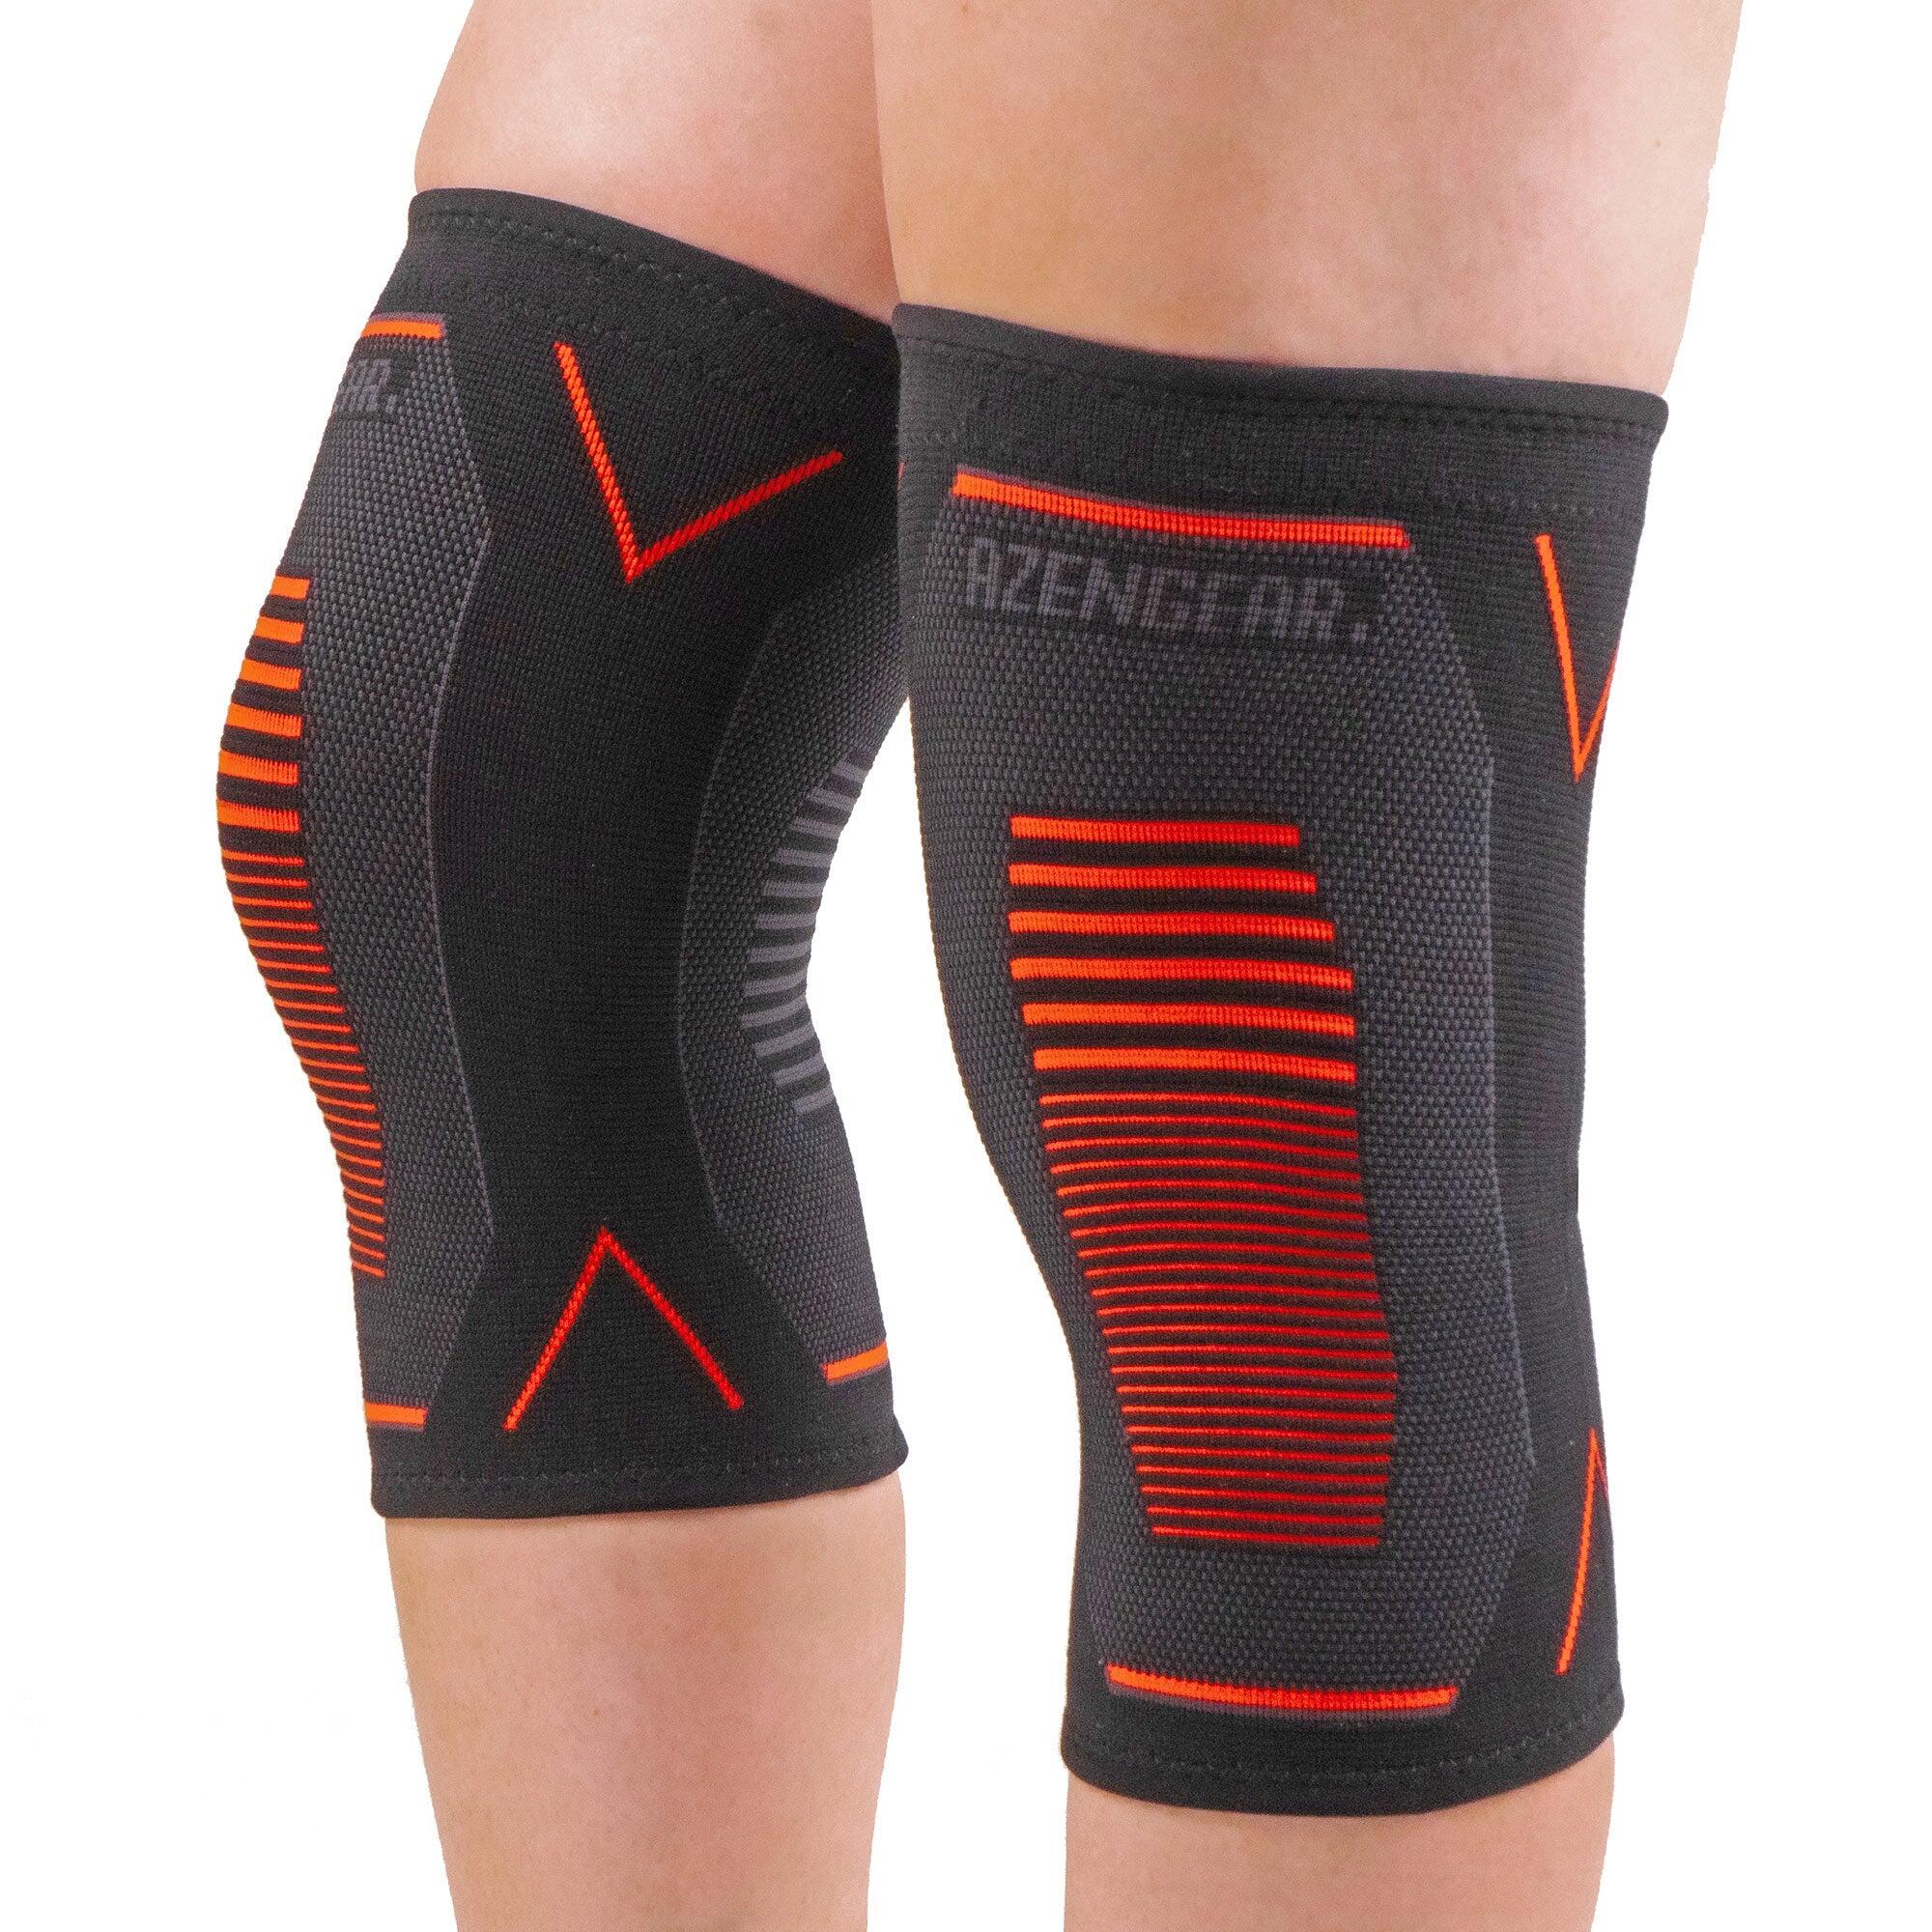 AZENGEAR Knee Compression Support Brace (Pair)